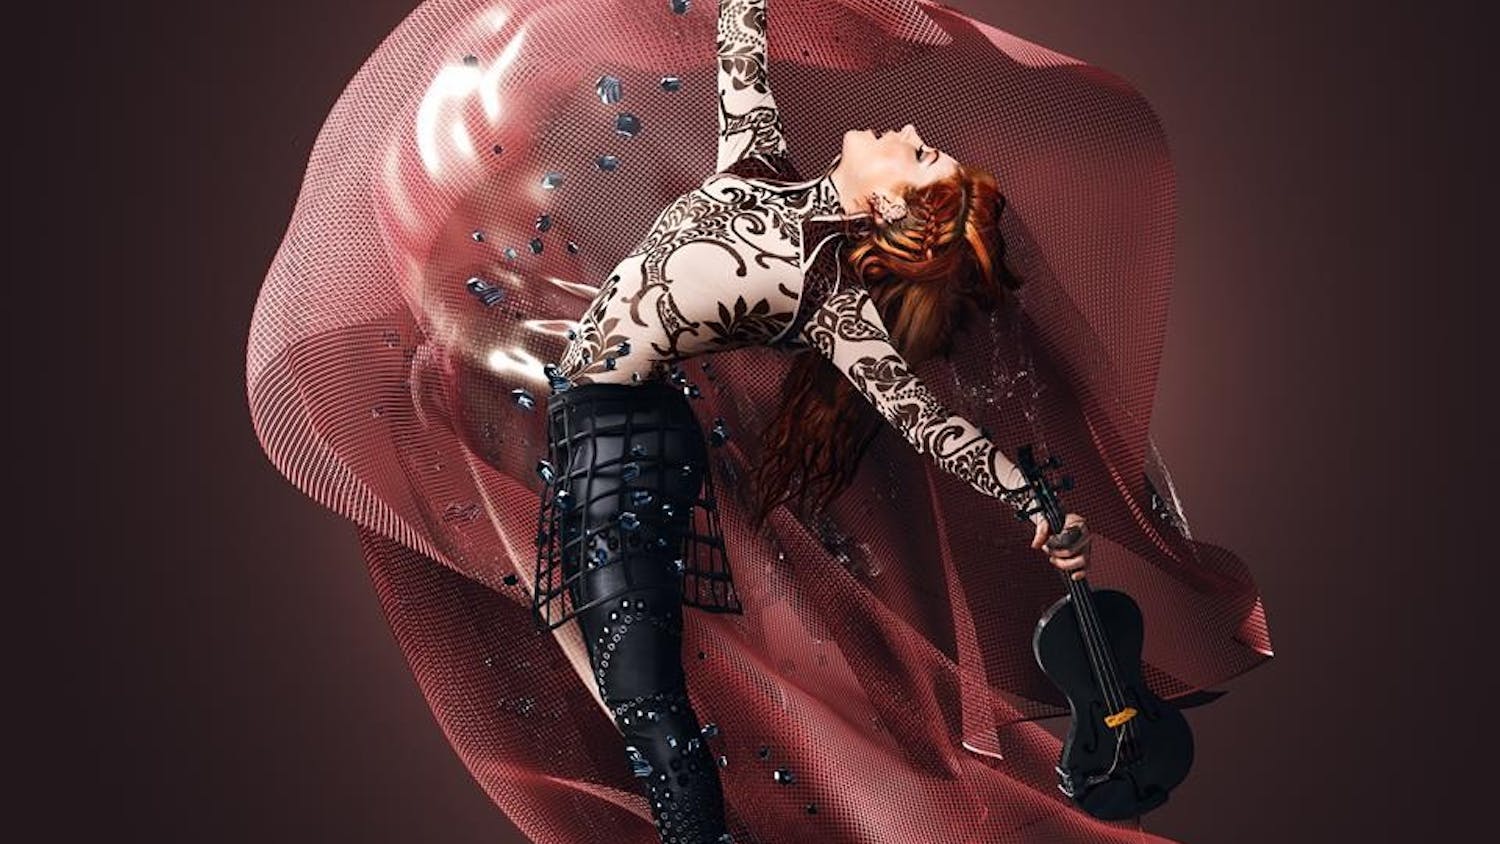 Lindsey Stirling's third studio album, "Brave Enough" features vocals from many popular artists like Christina Perri, Rivers Cuomo and Lecrae.